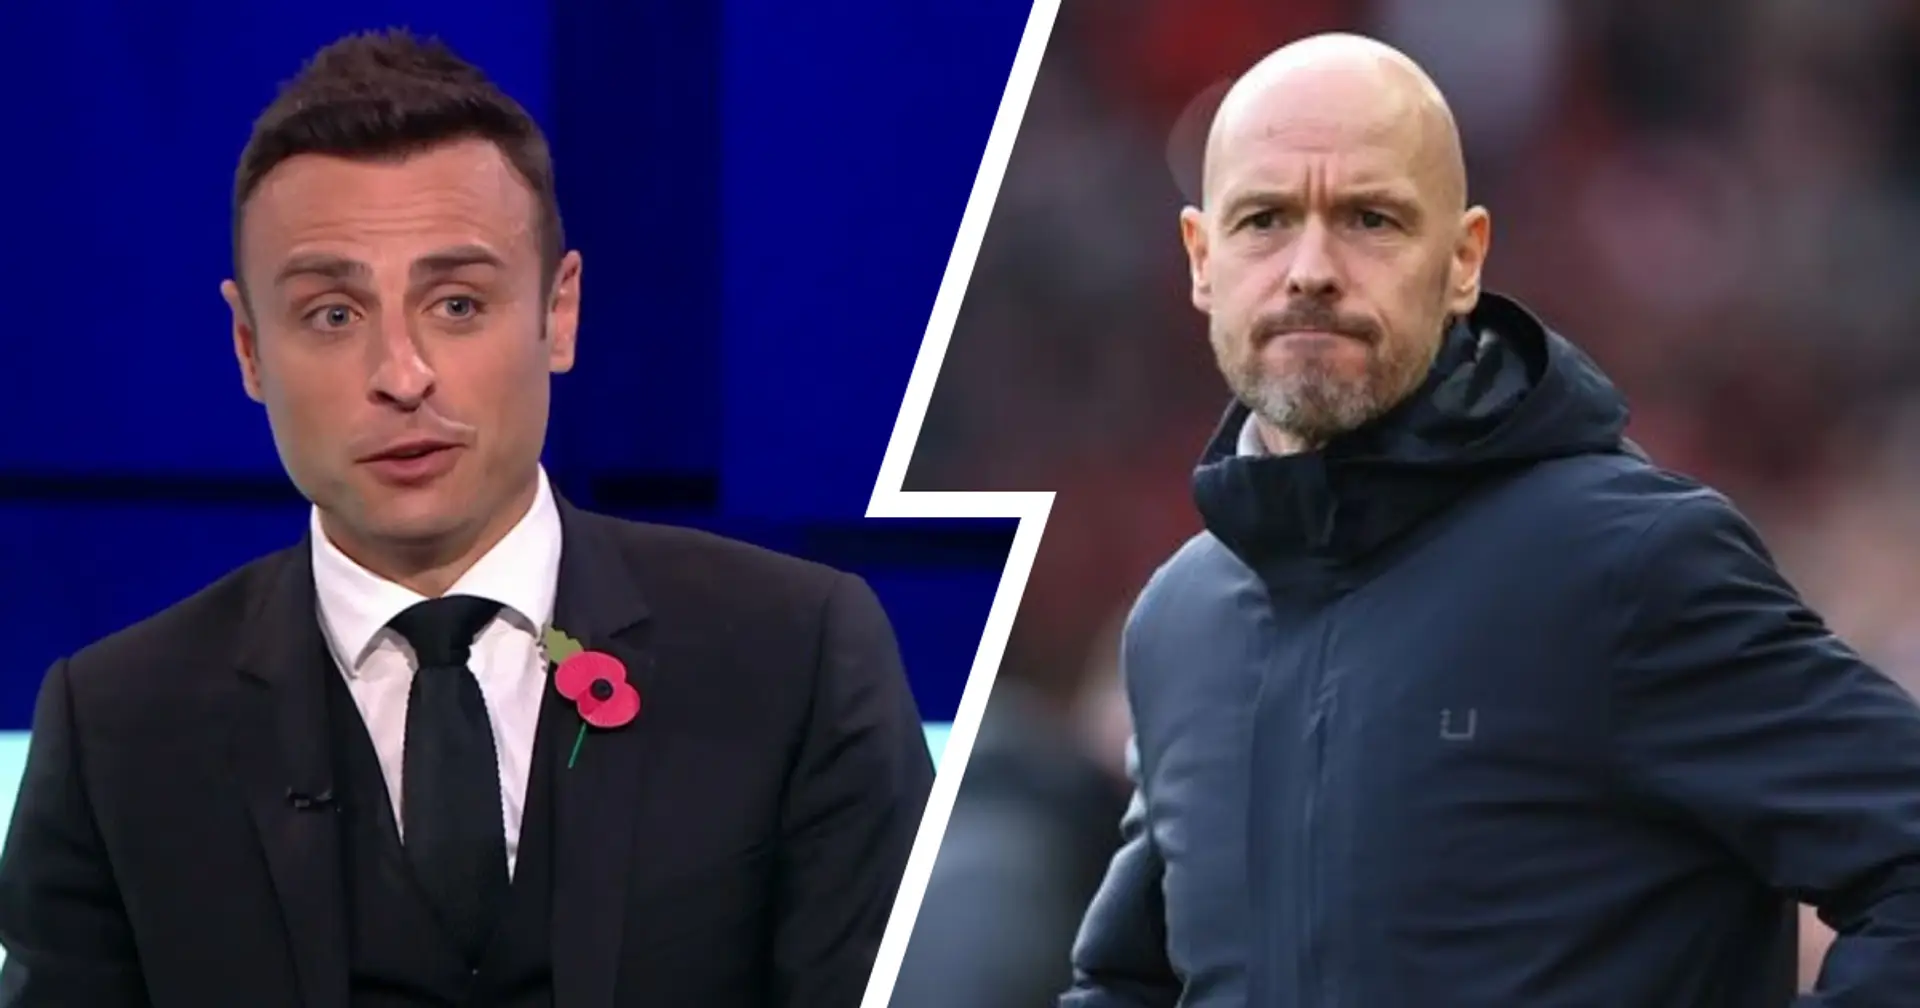 'You can see what Ten Hag wants from his players': Dimitar Berbatov explains why Man United will seal top-4 spot